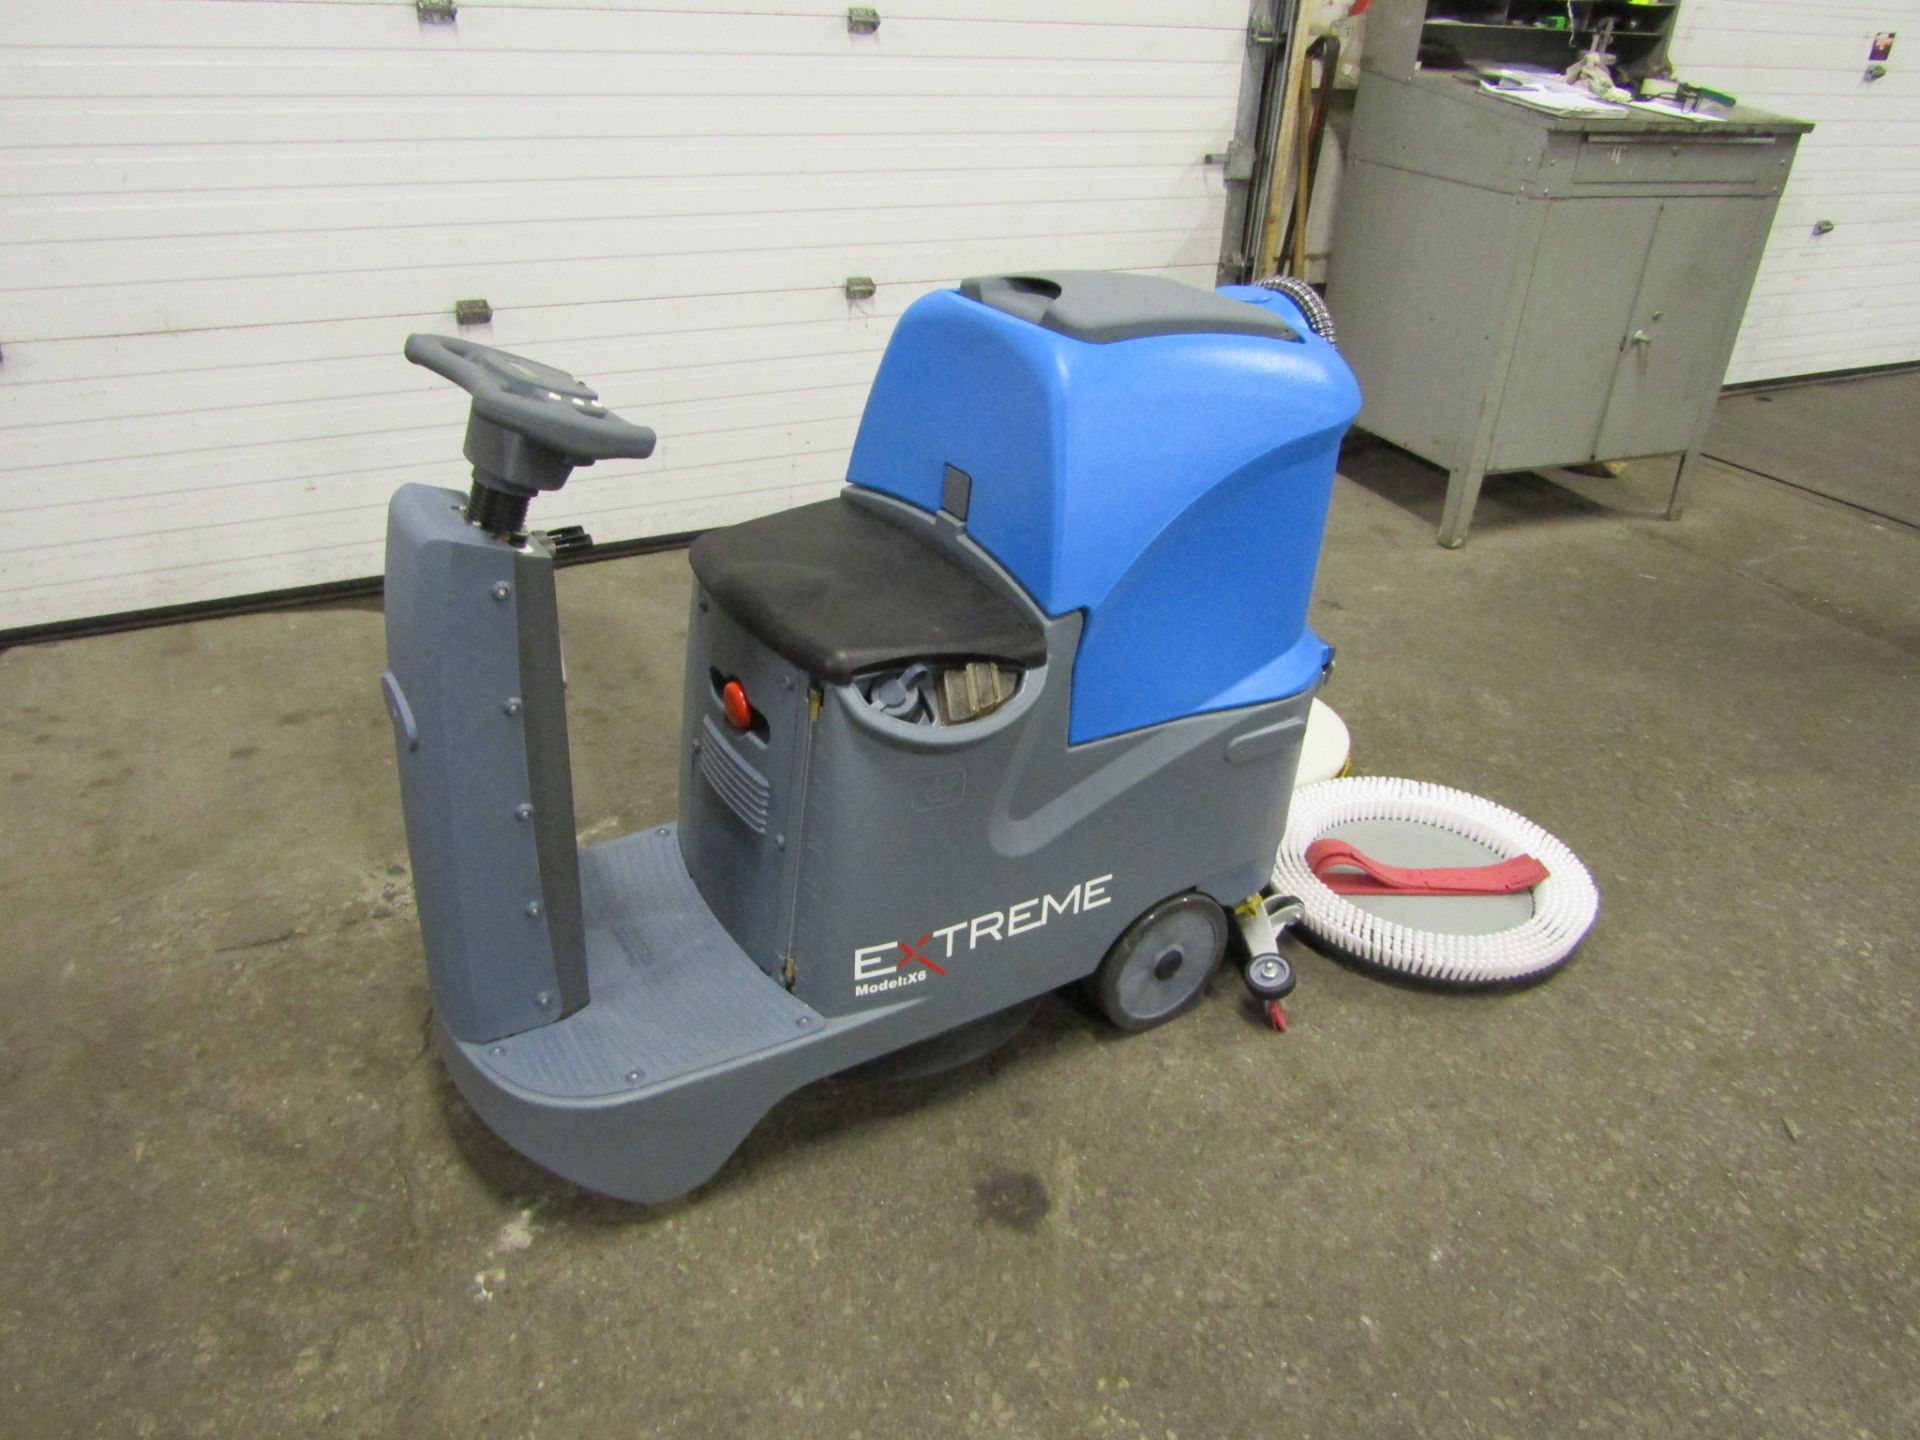 Extreme MINT Ride-On Floor Sweeper Scrubber Unit model X6 - BRAND NEW with extra pads, digital